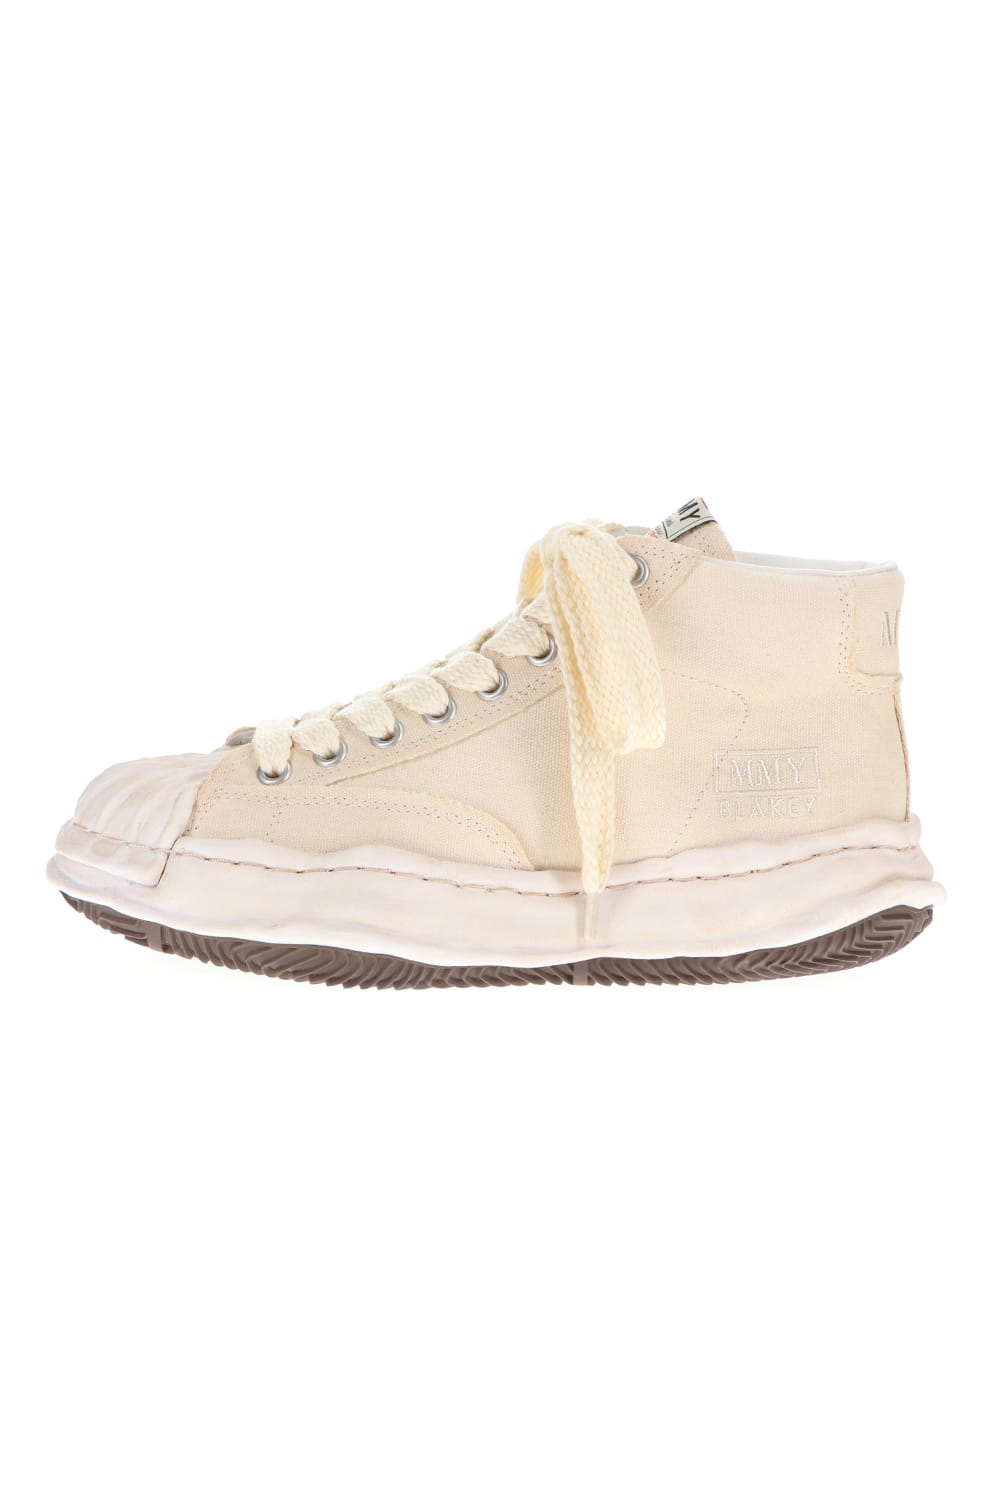 -BLAKEY High- Original STC sole over dyed canvas High-Top sneakers White